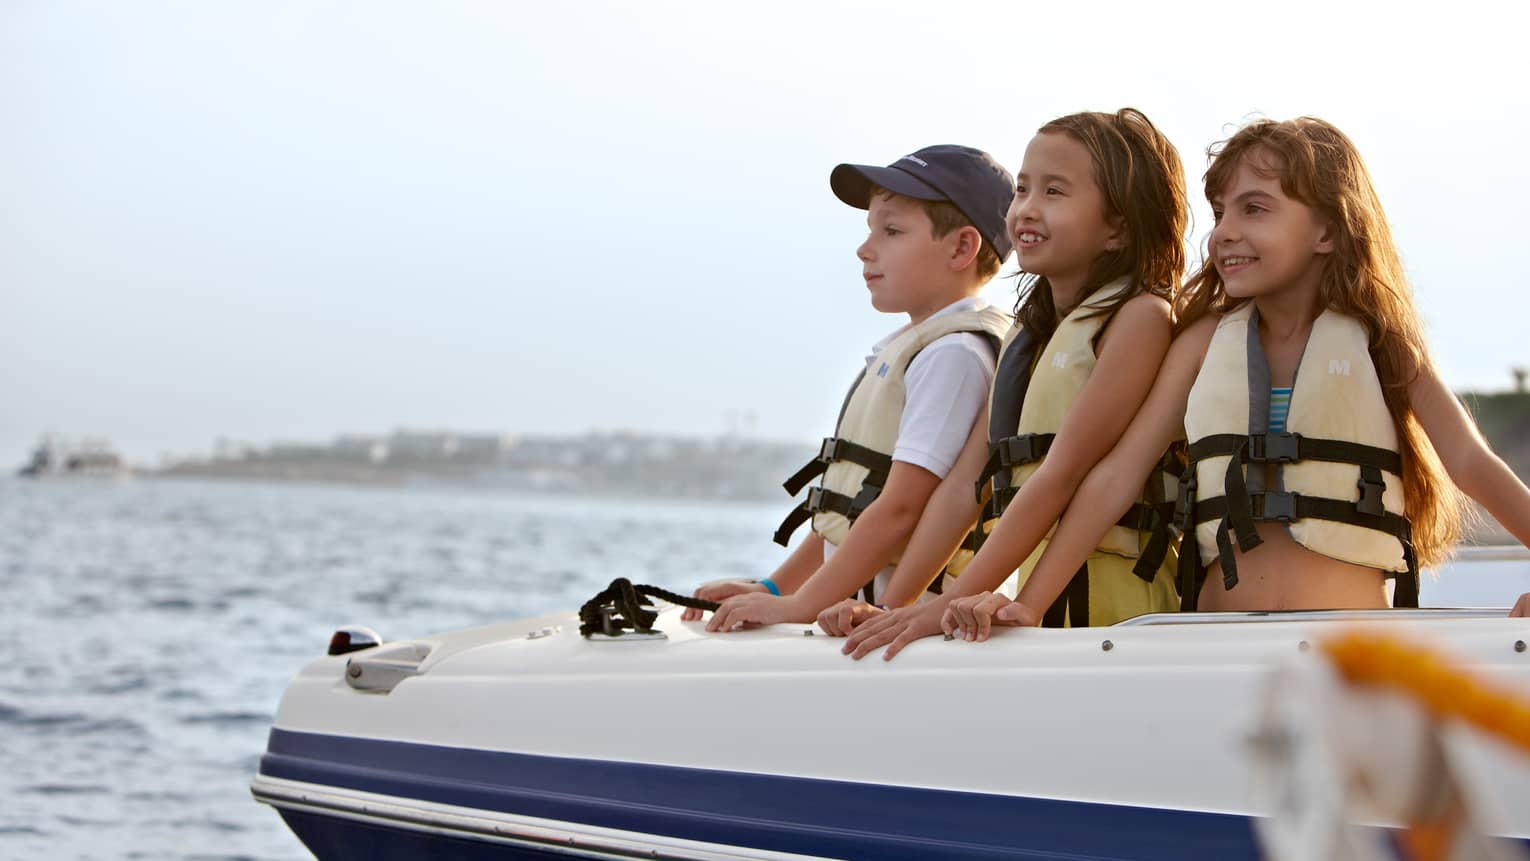 Three children in lifejackets in front of boat smile, look out on water 